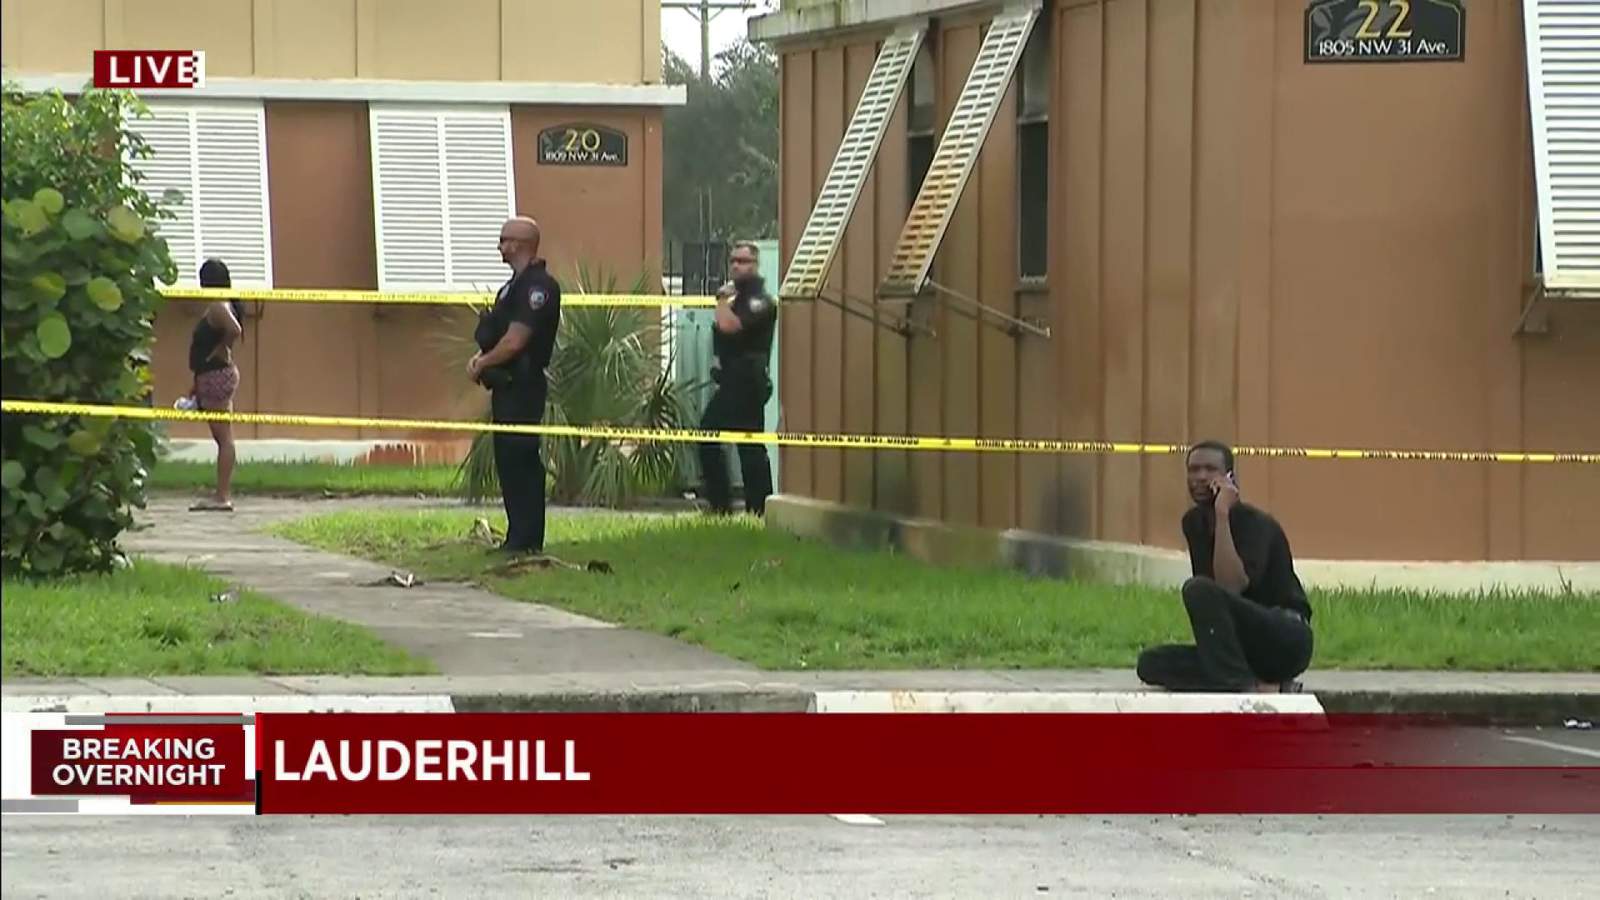 Investigation ongoing after deadly shooting at Lauderhill apartment complex